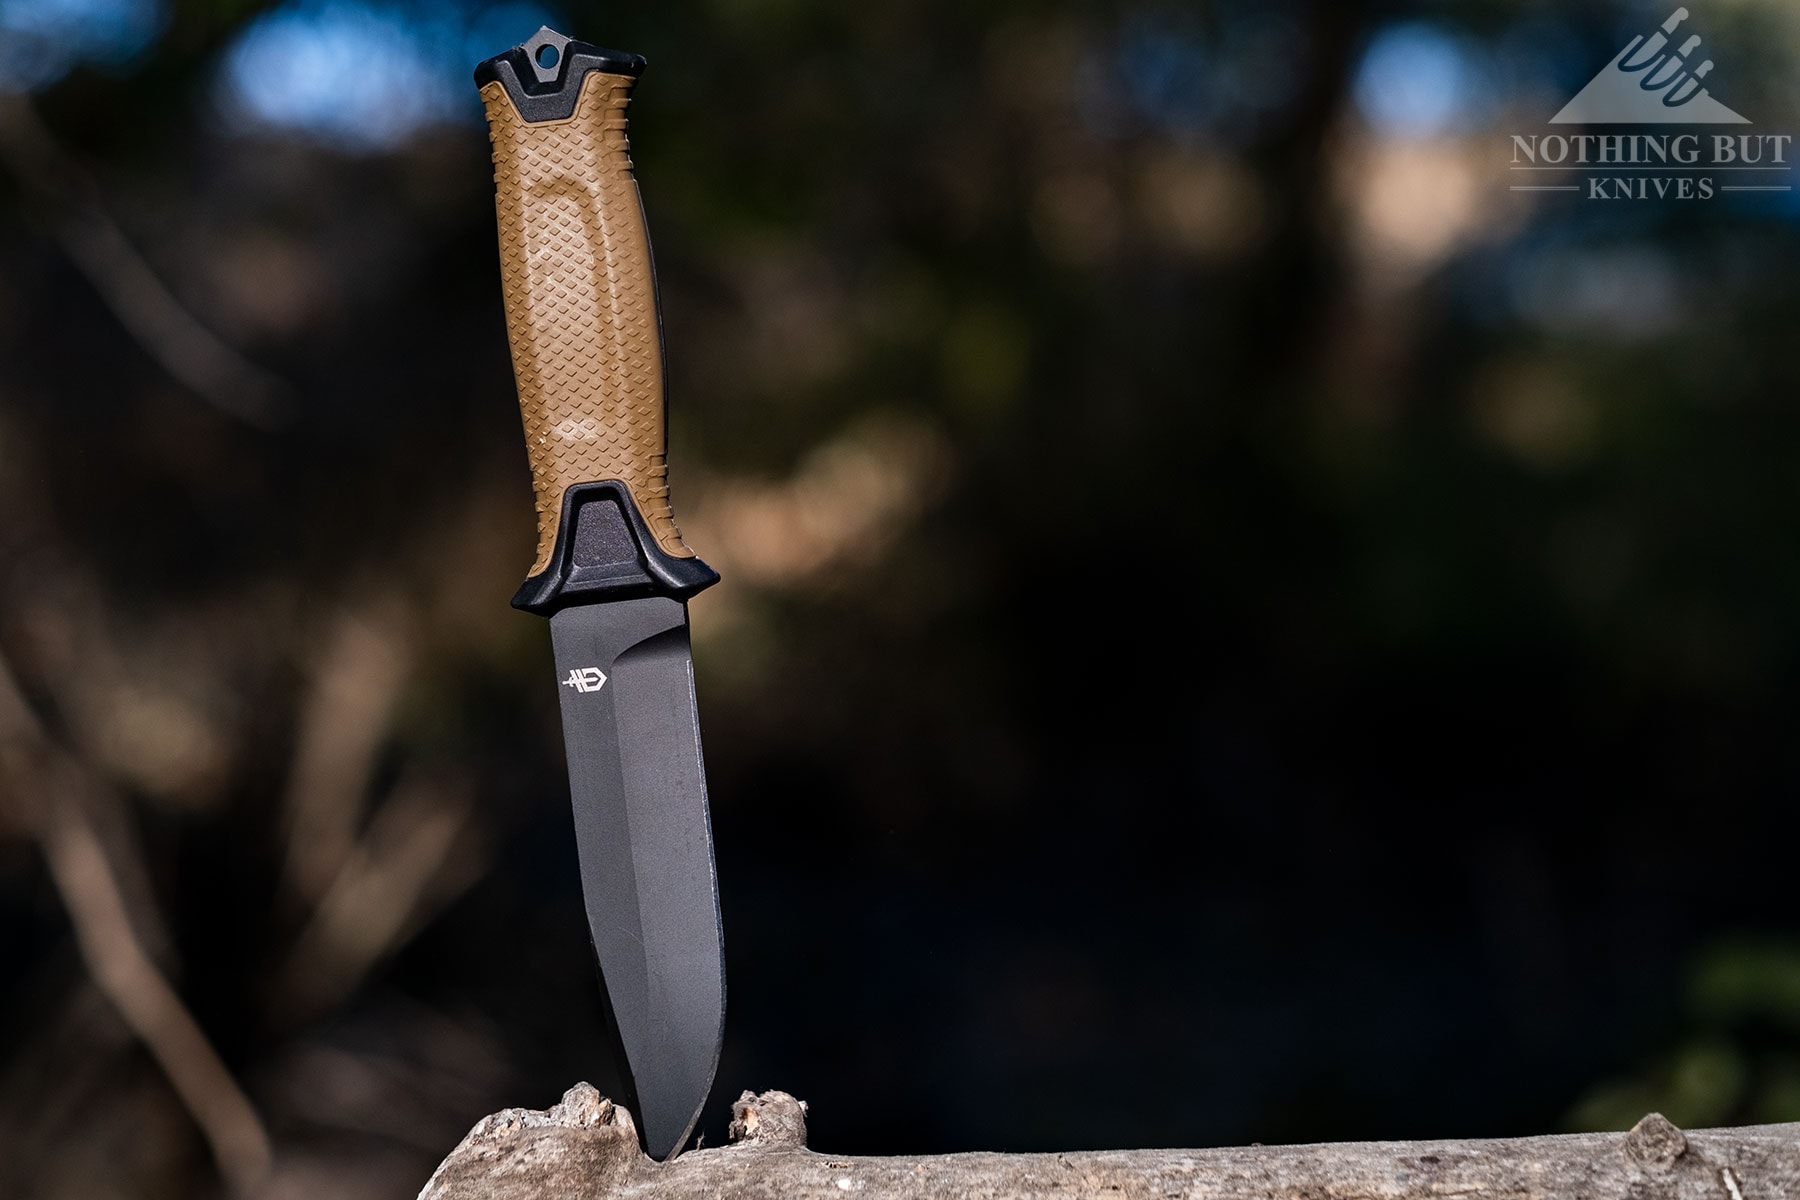 The Gerber StrongArm is a Popular American made survival knife with a versatile sheath that can be configured for multiple carry options including horizontal.